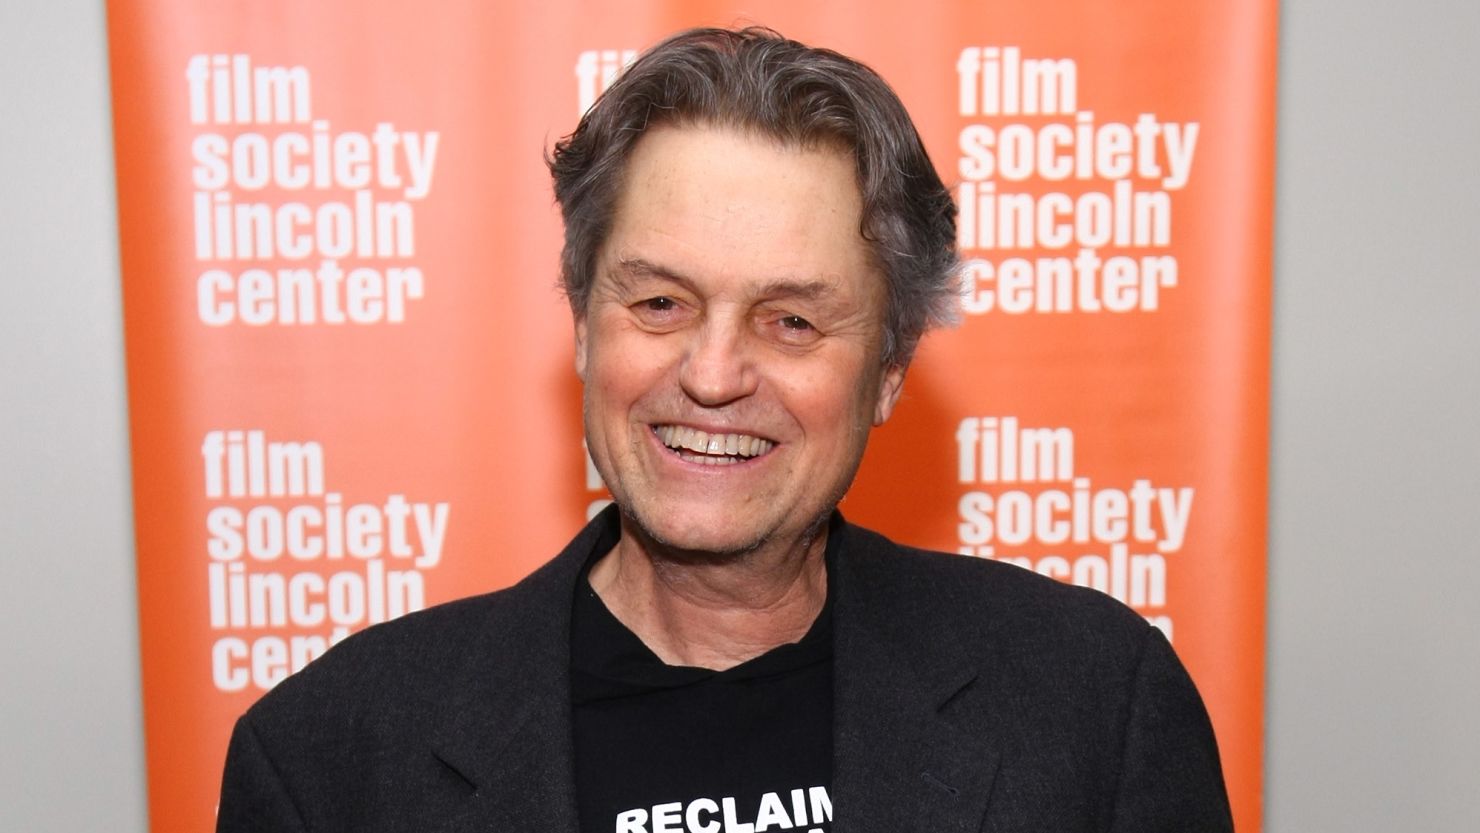 Jonathan Demme is shown attending an event in February.